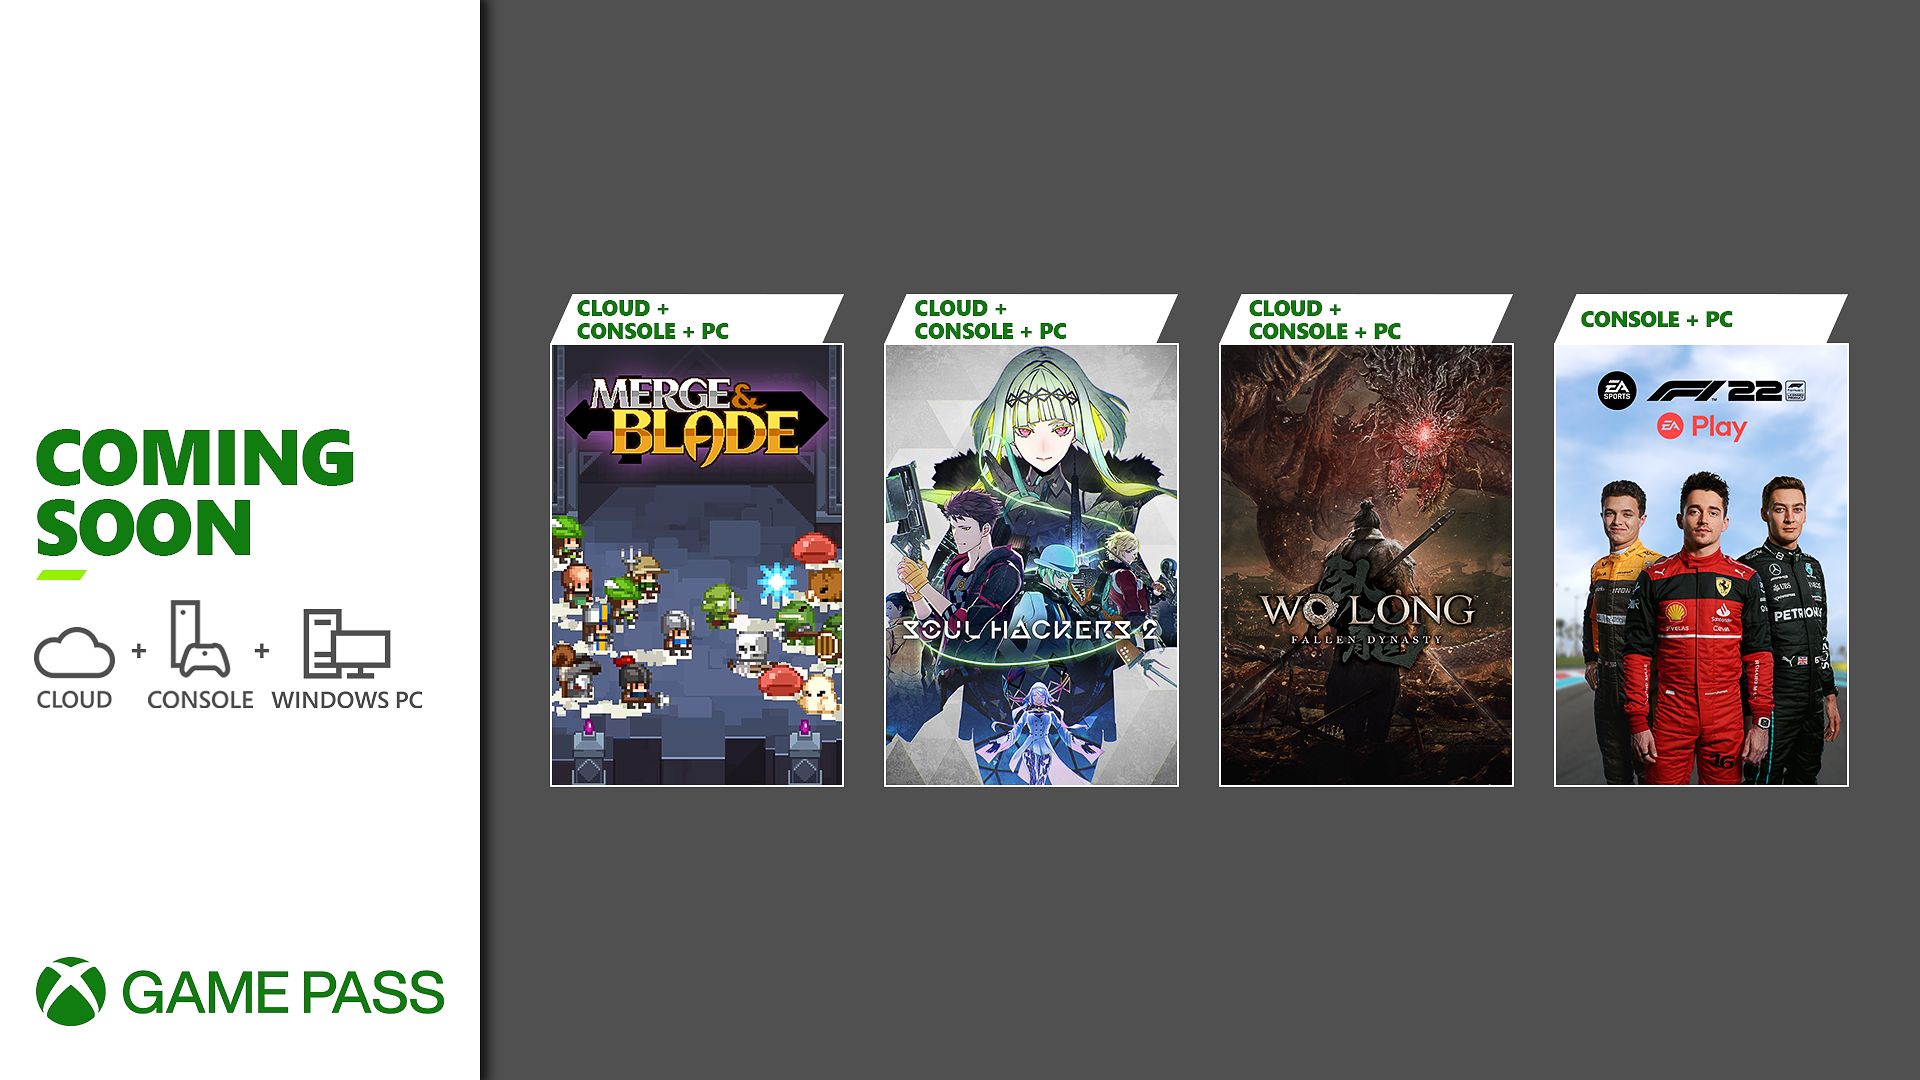 Coming to Xbox Game Pass: Wo Long: Fallen Dynasty, Soul Hackers 2, F1 22, and Merge & Blade